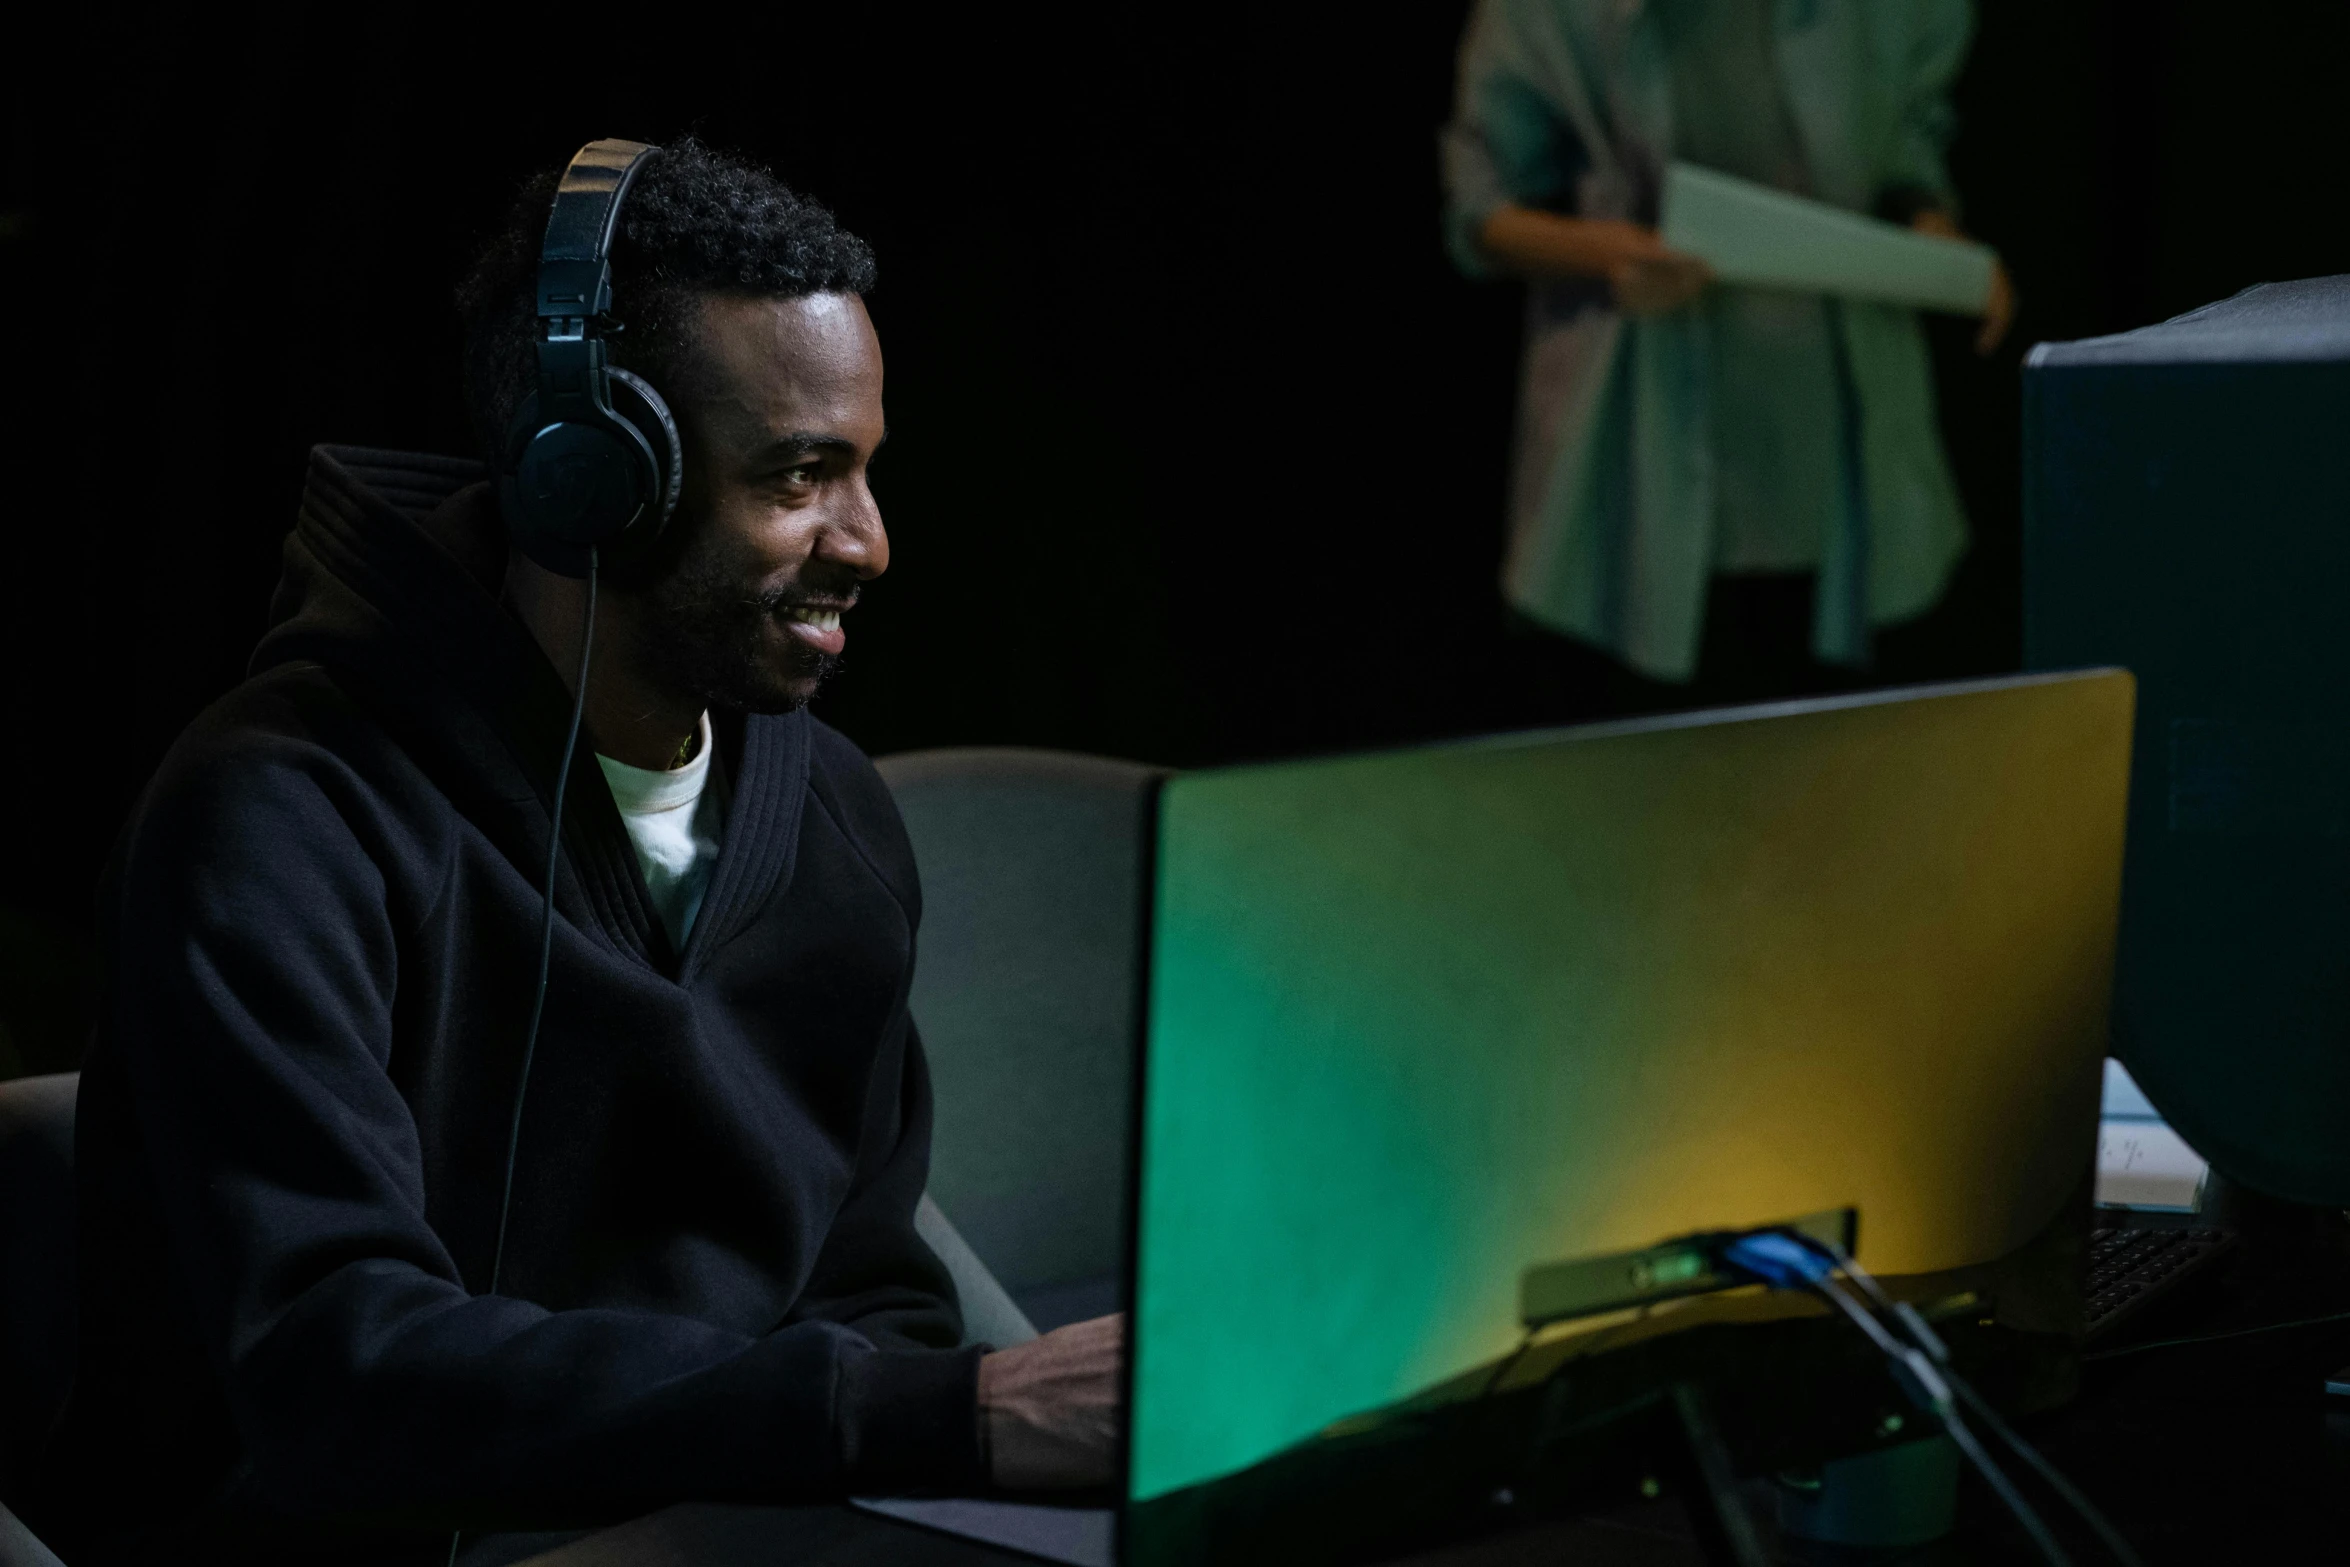 a man sitting in front of a computer wearing headphones, steam workshop, performance, jaylen brown, people enjoying the show